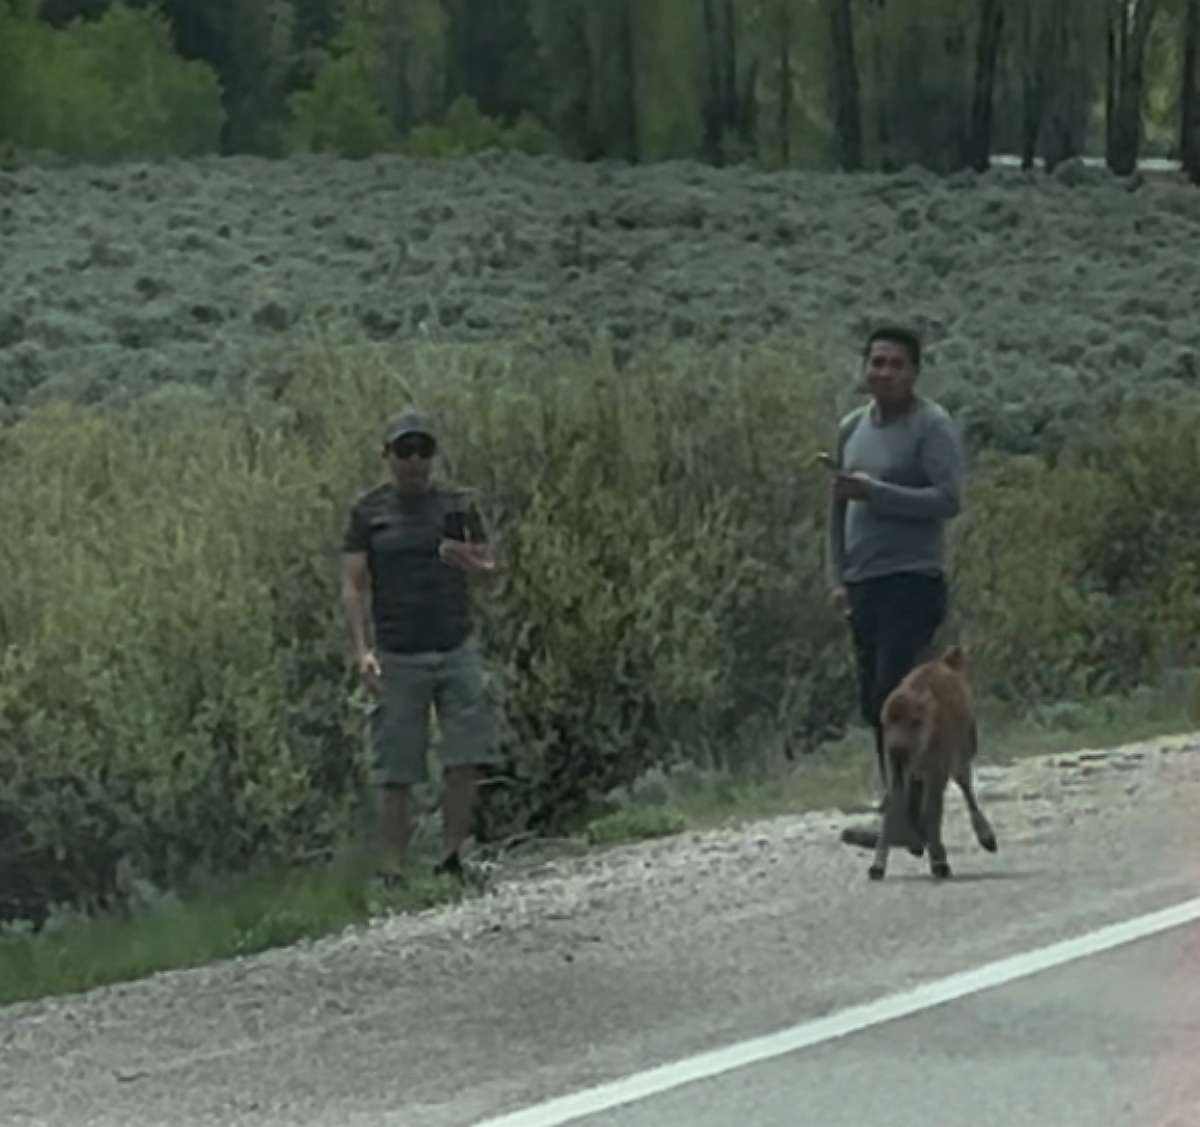 PHOTO: Authorities are looking for two people after they allegedly approached and harassed a bison calf at a national park in Wyoming on Sunday, June 4, 2023.